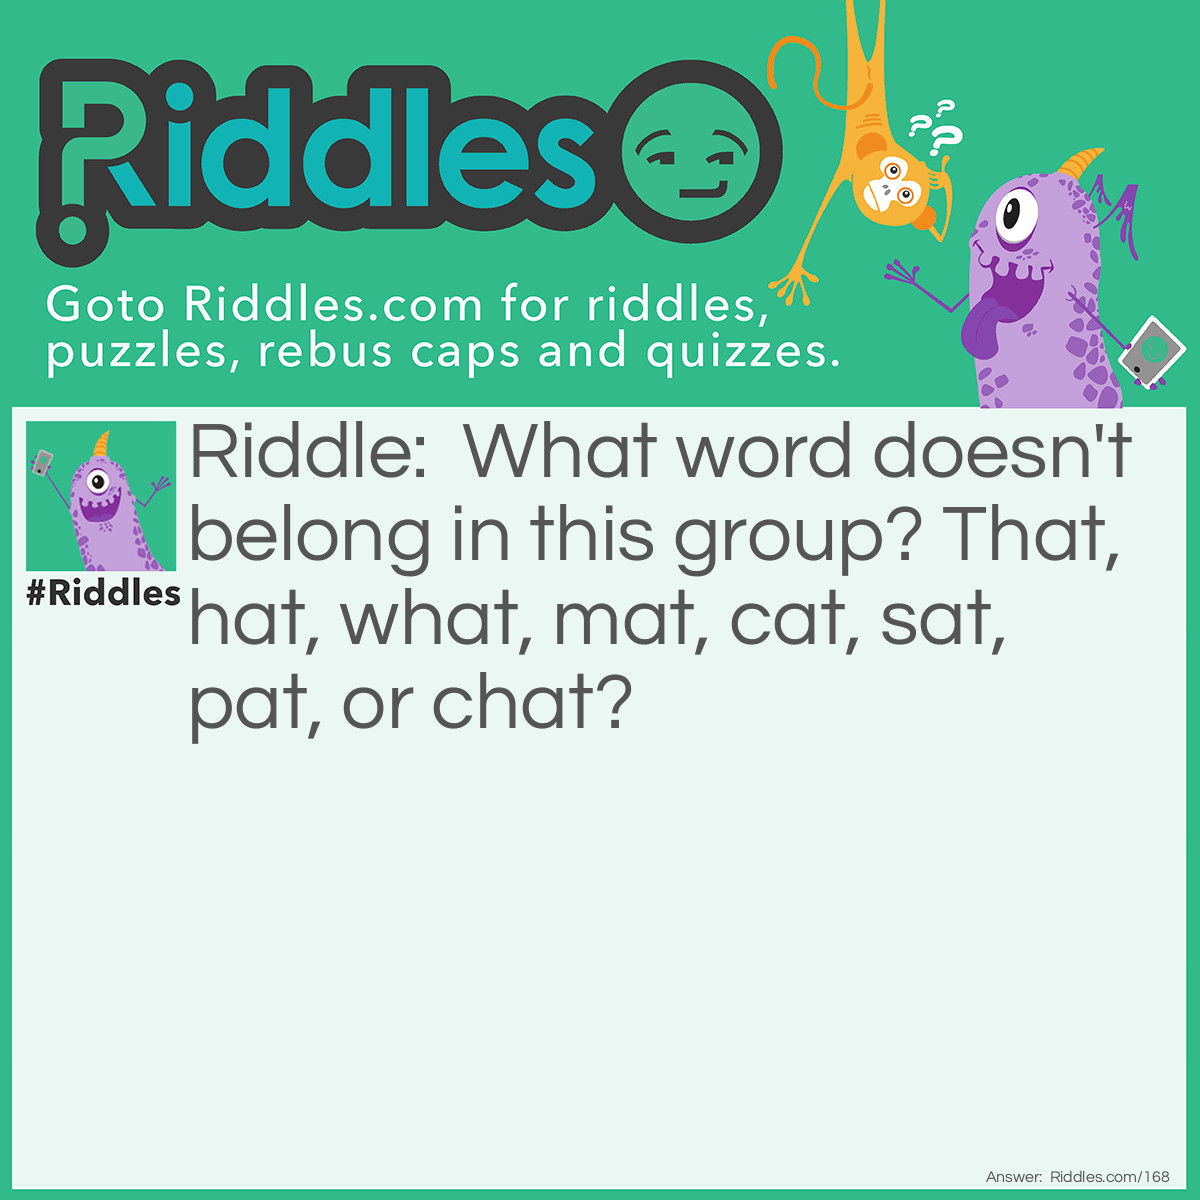 Riddle: What word doesn't belong in this group? That, hat, what, mat, cat, sat, pat, or chat? Answer: What. It's pronounced differently; all of the others rhyme.